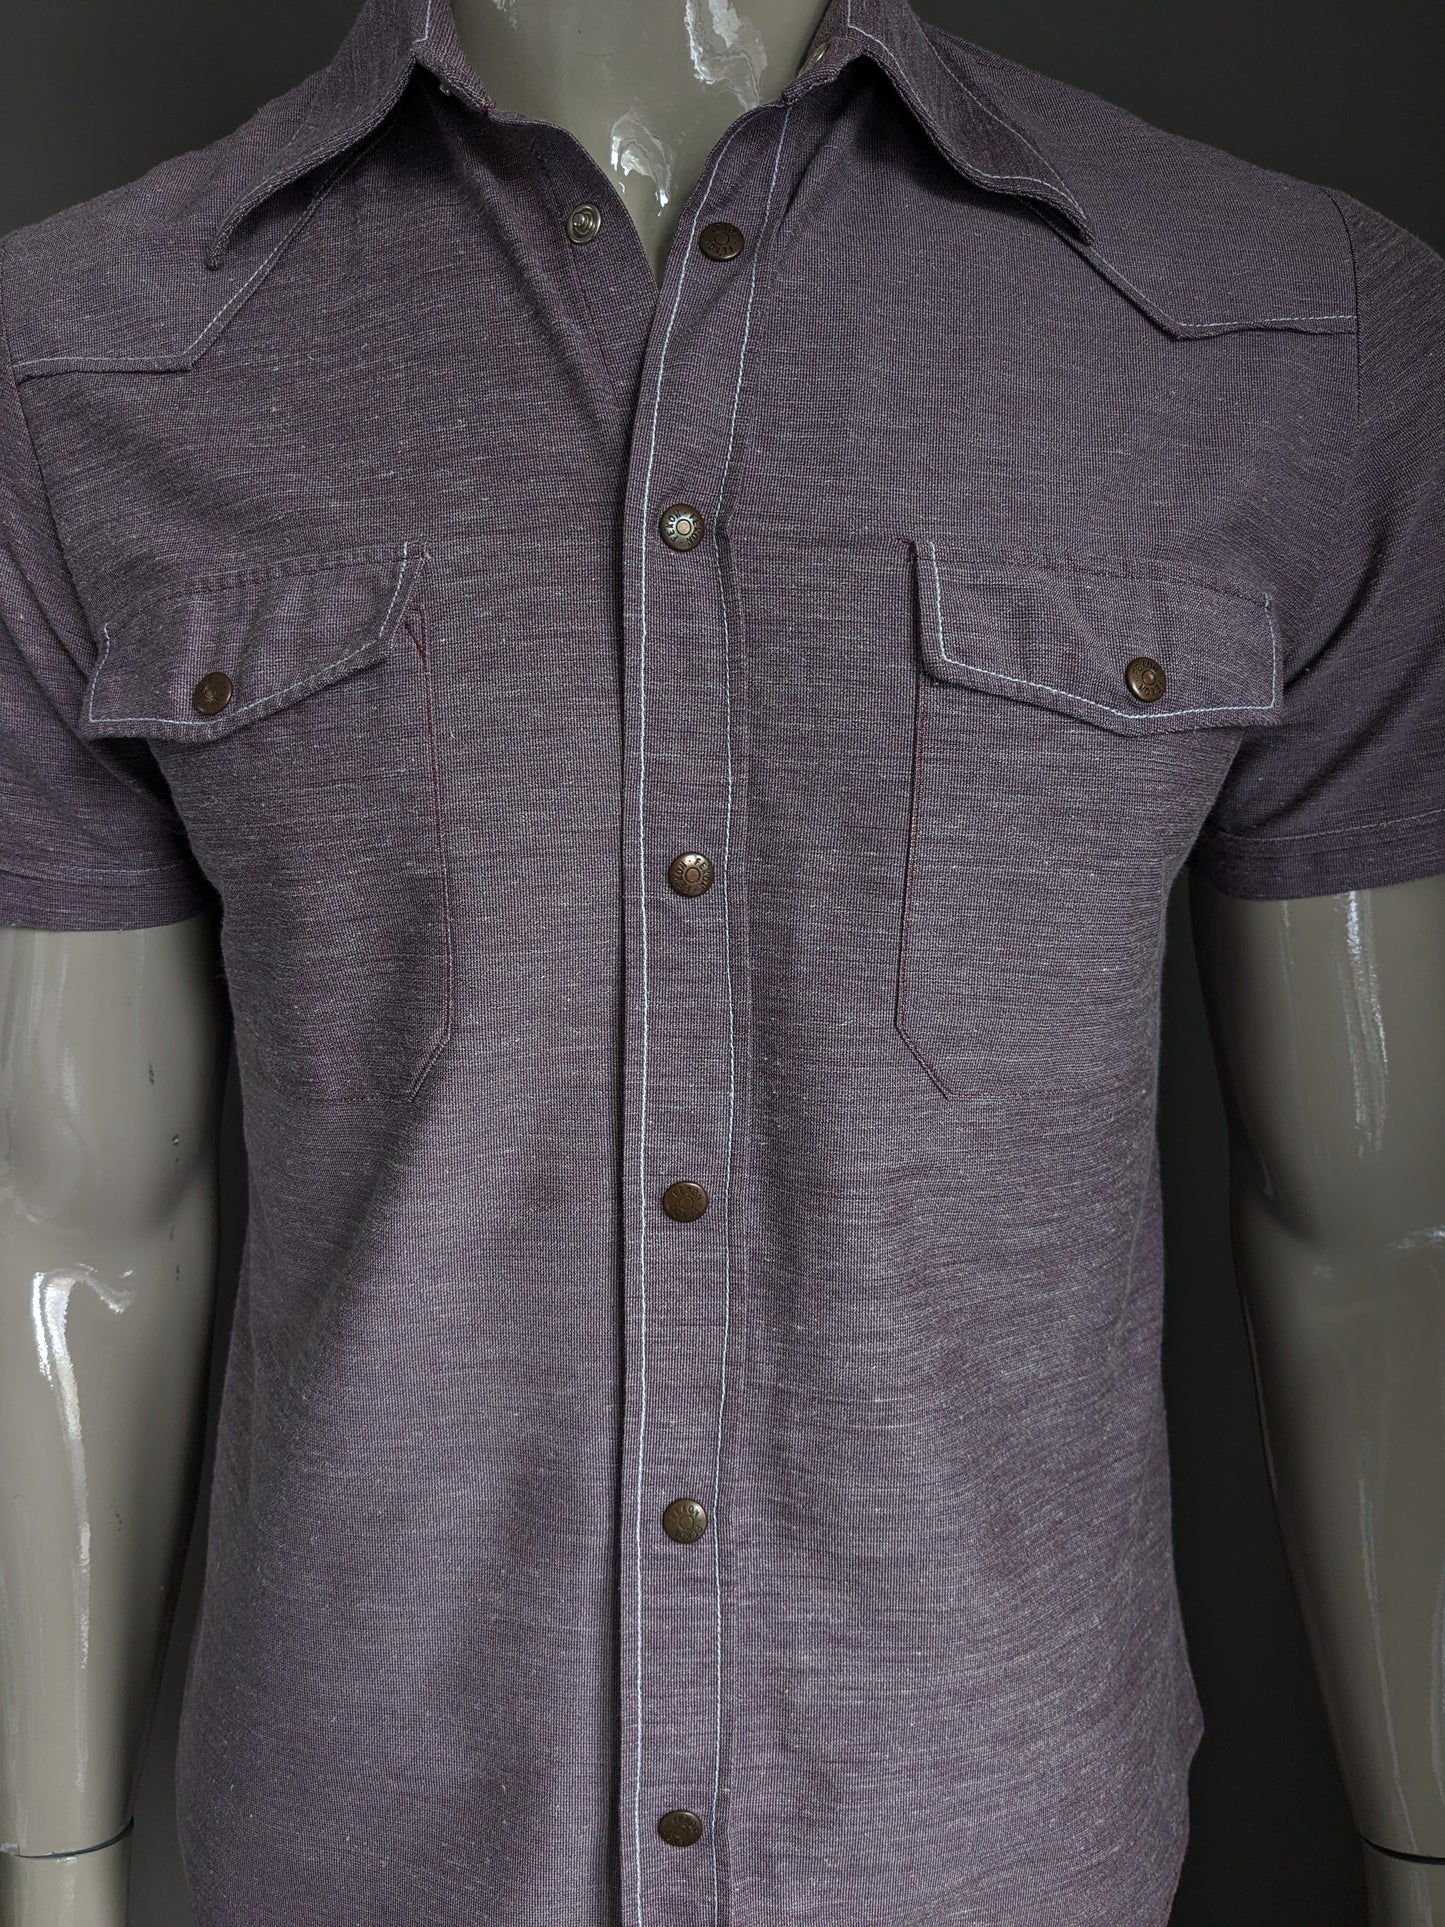 Vintage Fekon shirt short sleeve with a point collar and press studs. Purple white mixed. Size M.